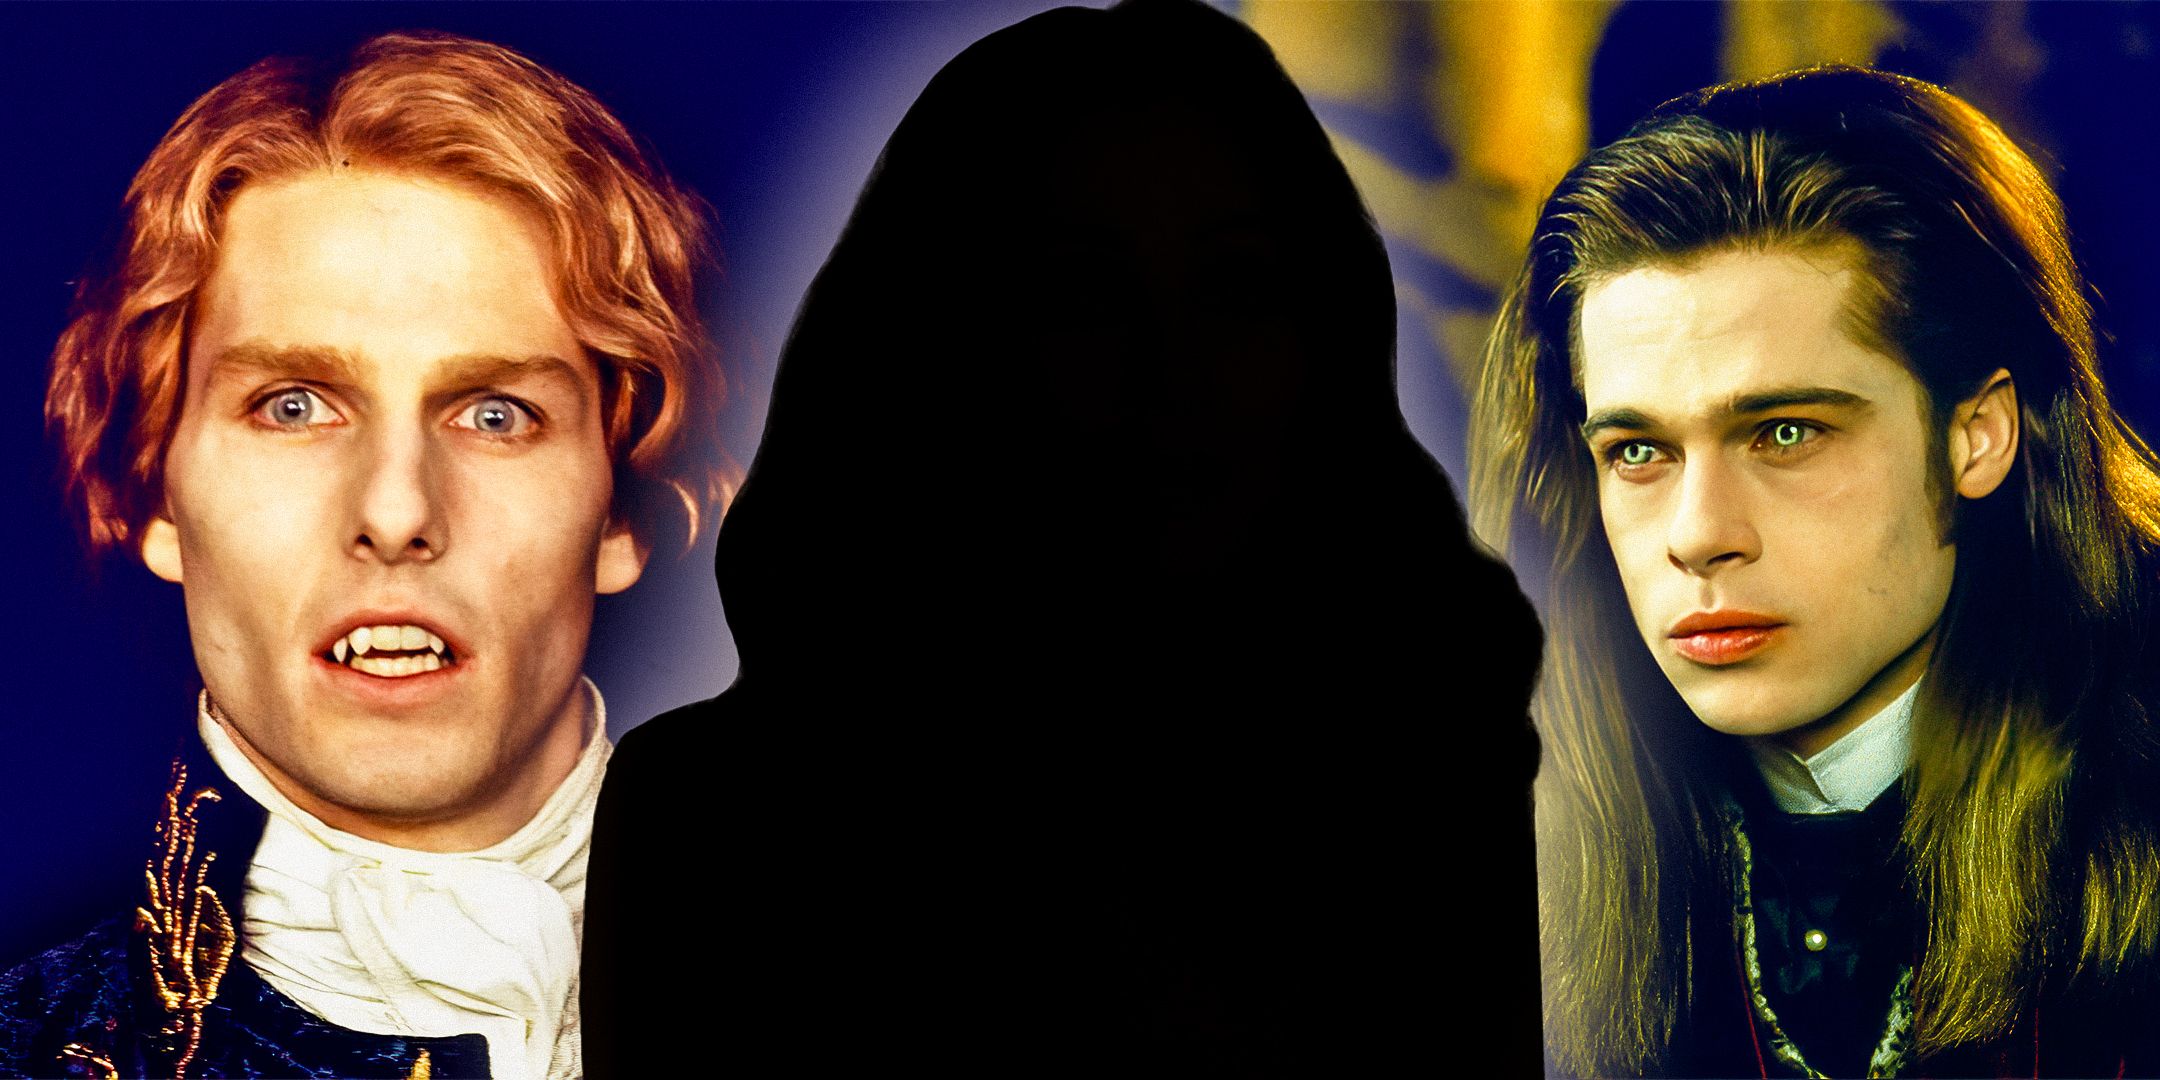 Interview with the Vampire Lestat next to a dark female silhouette next to Louis